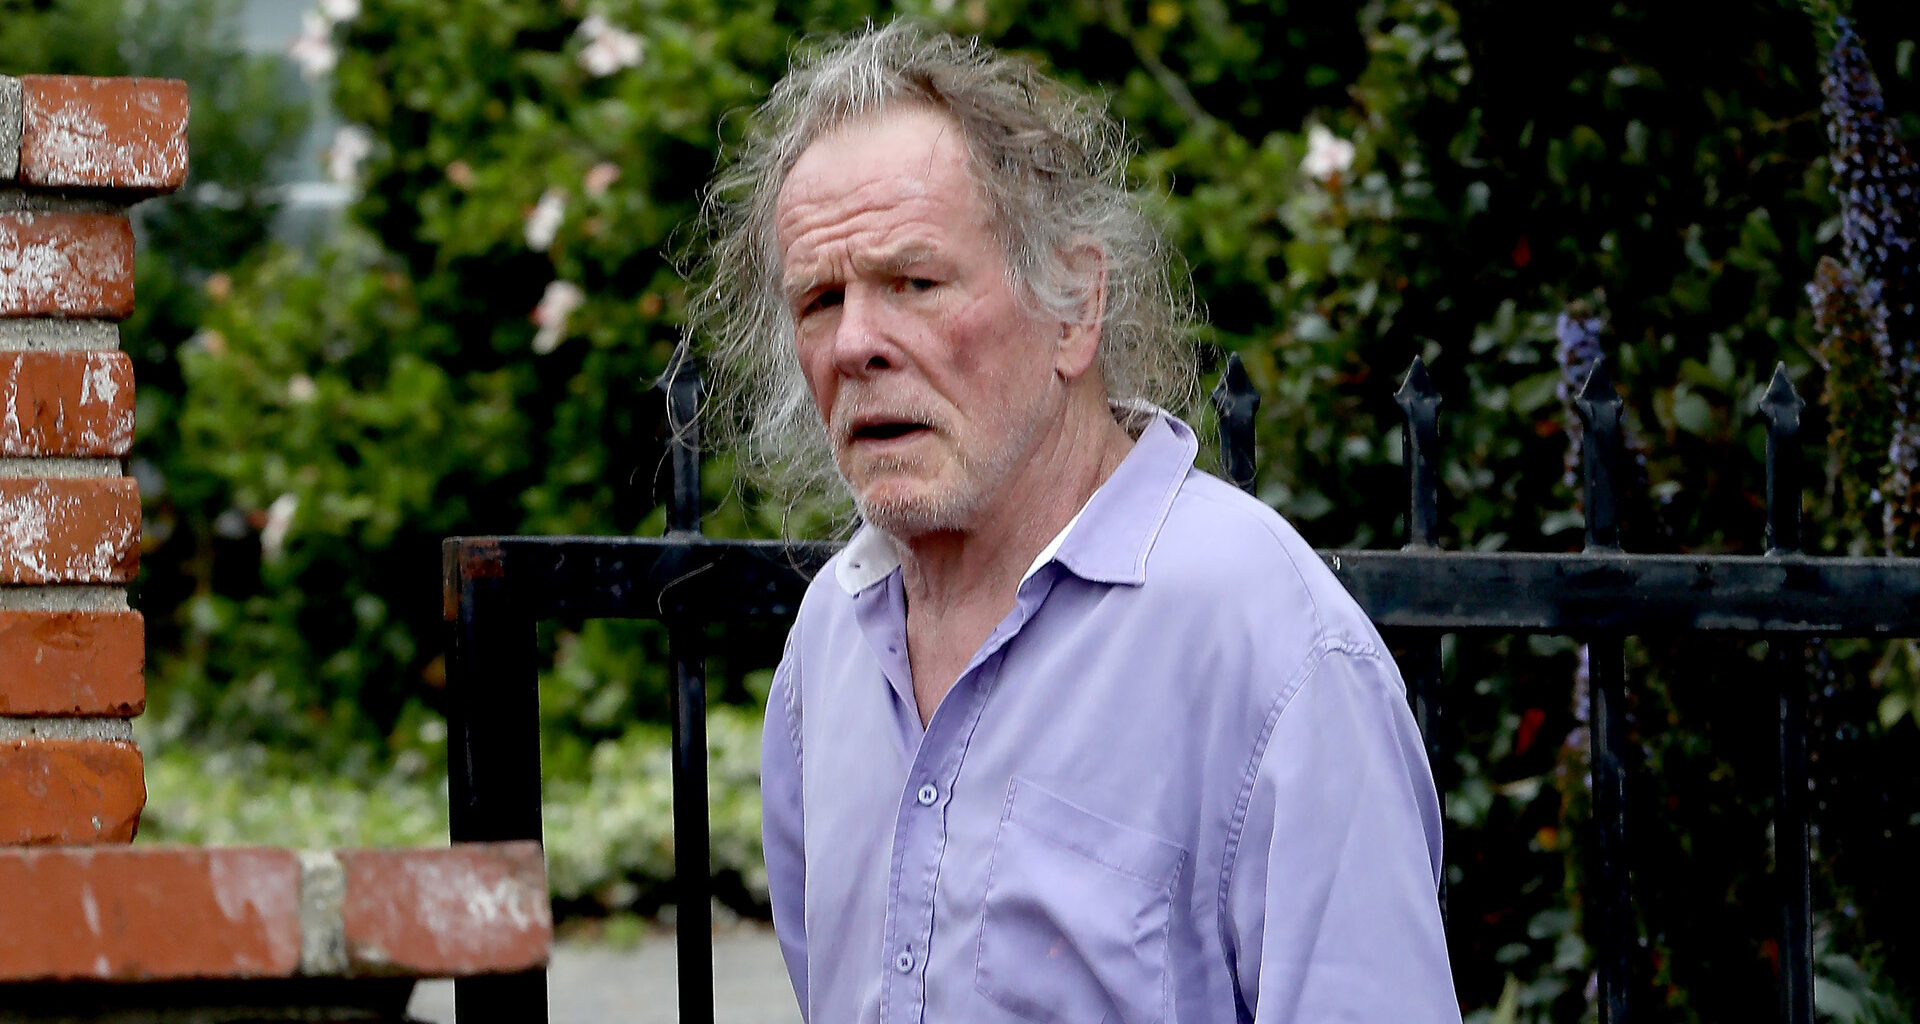 Nick Nolte, 83, looks totally different to ’90s heyday with messy hair and wrinkled outfit in rare Malibu outing